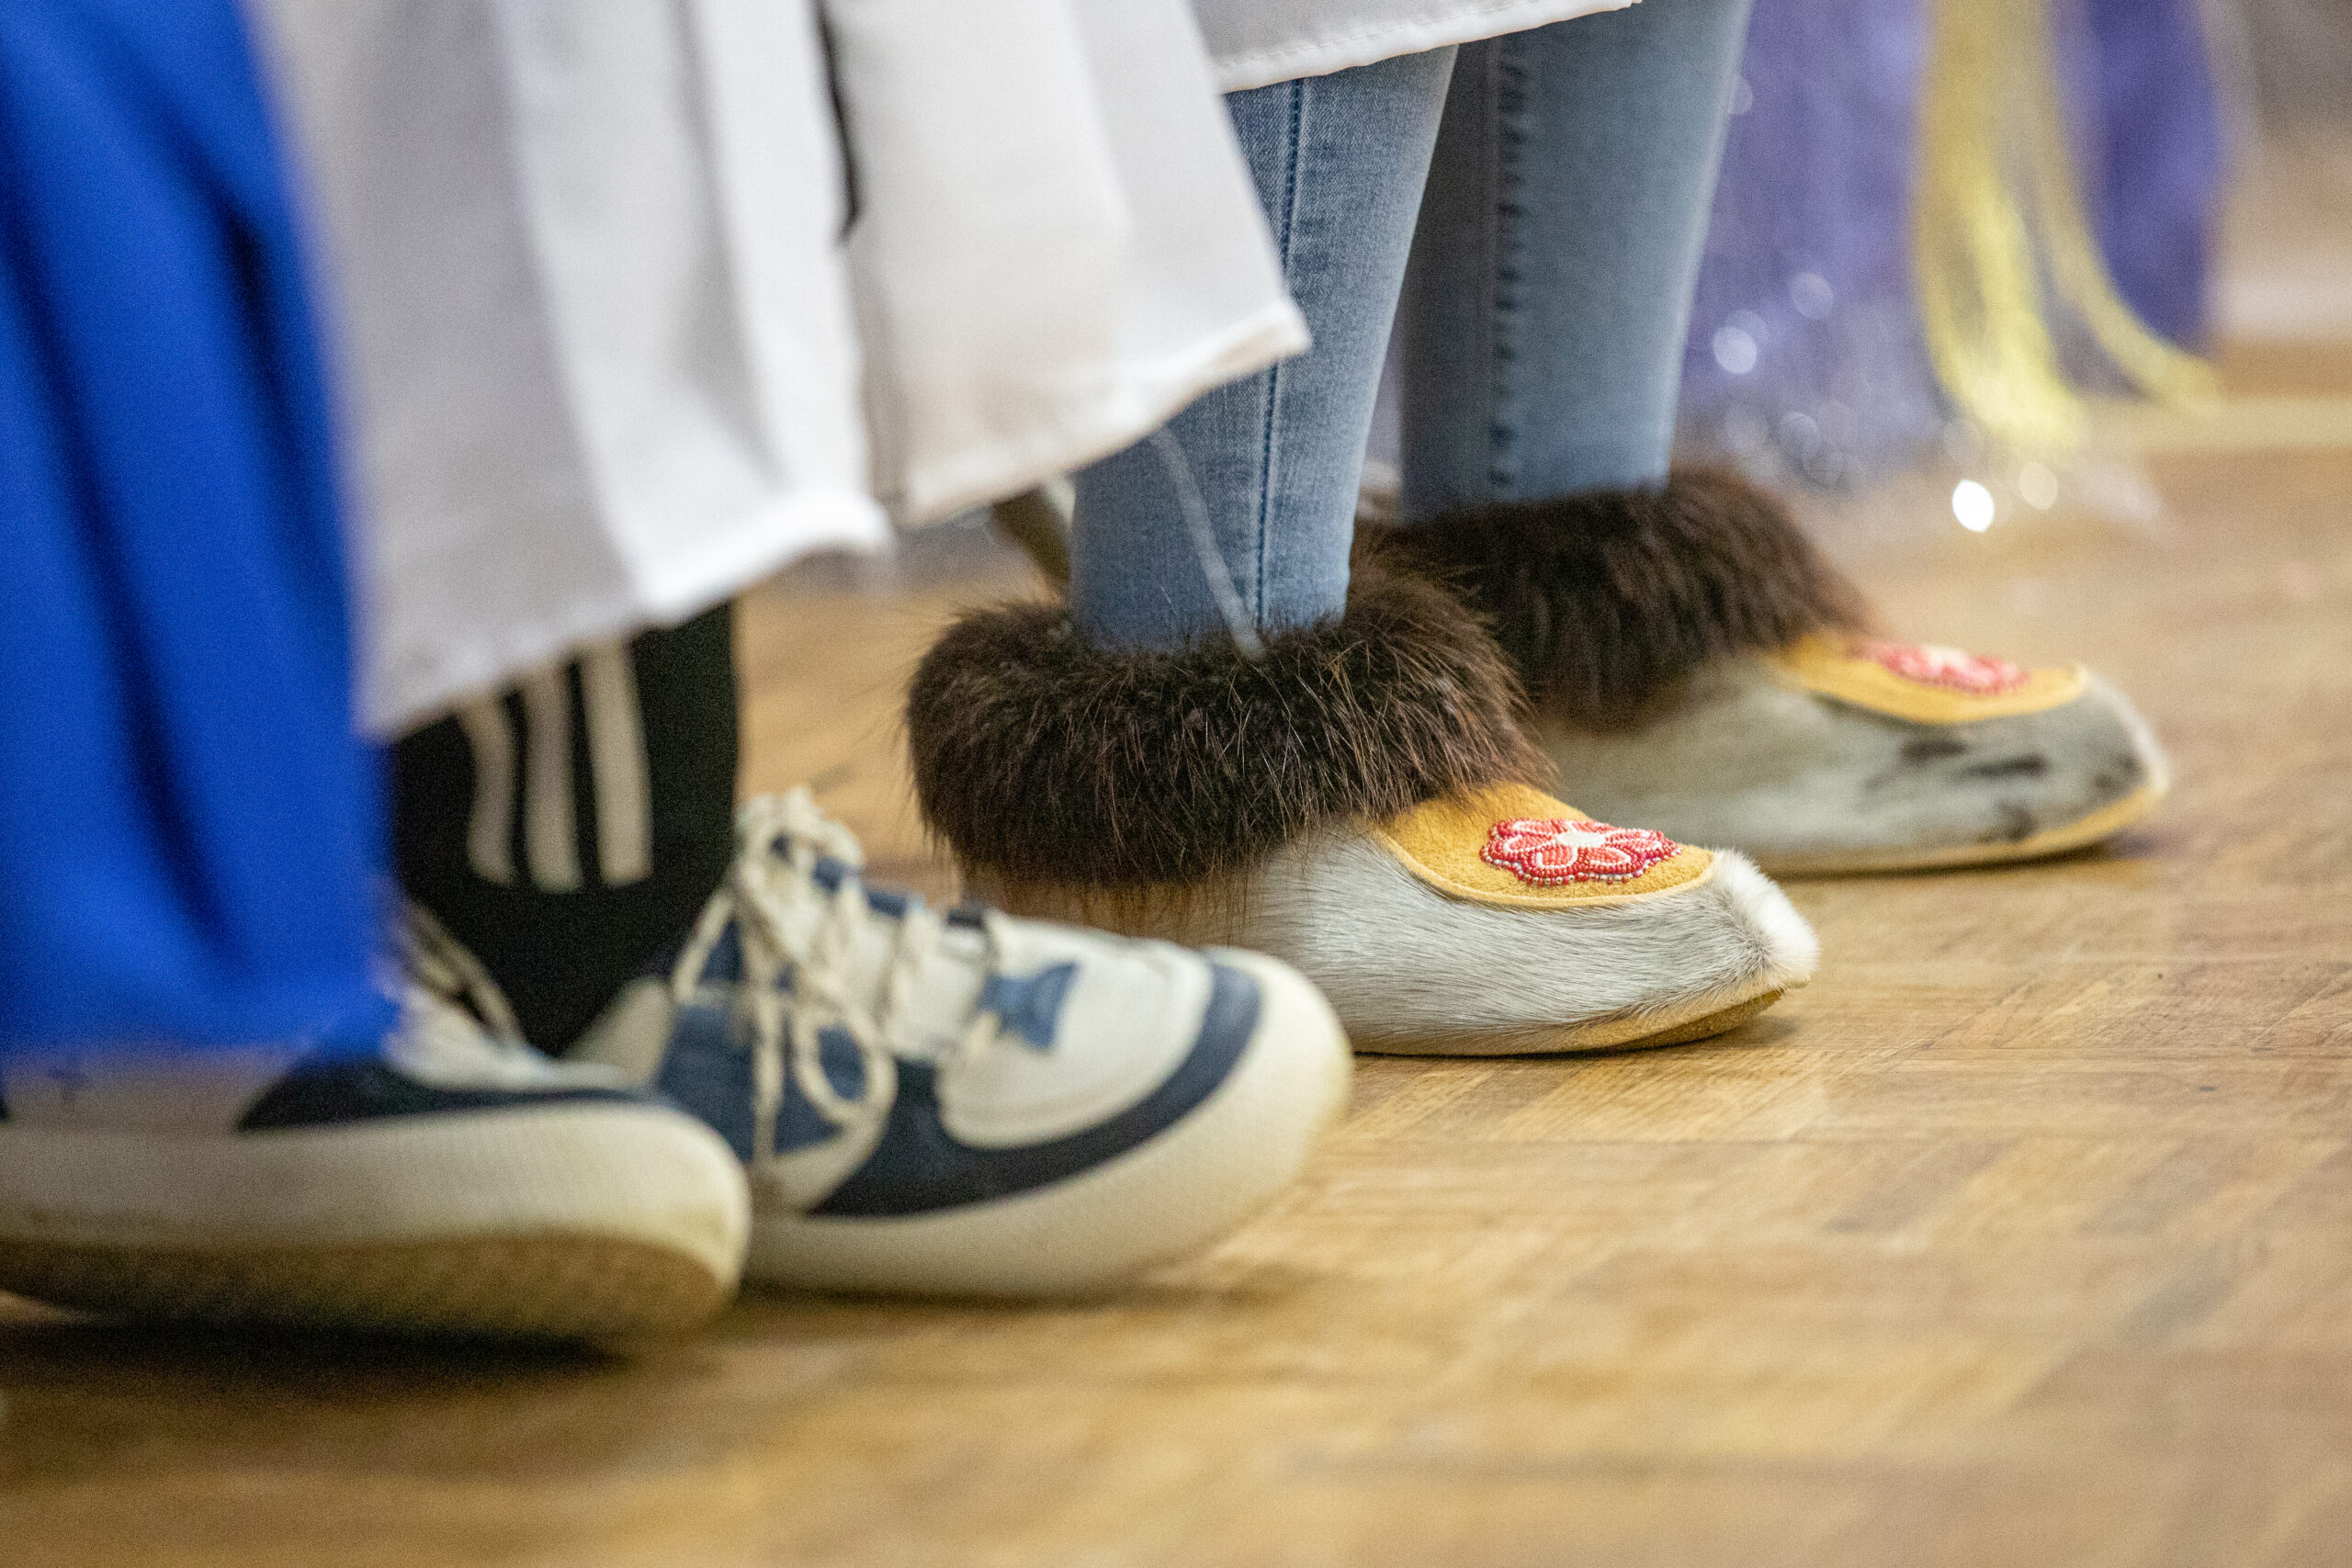 A pair of mukluks that one student wears with her graduation outfit.